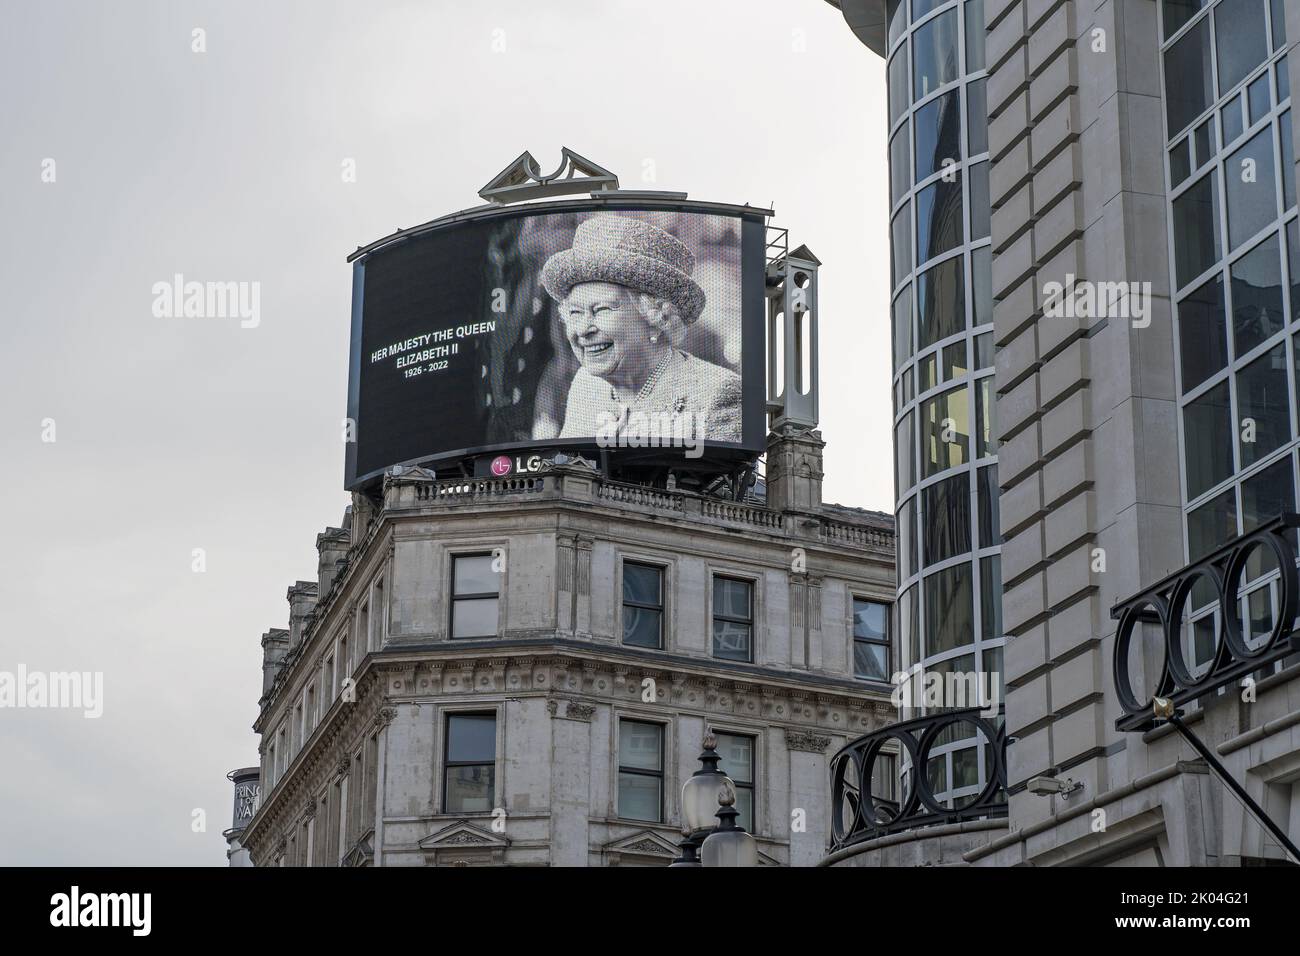 Portraits of Queen Elizabeth II in black and white on the Piccadilly Circus large screen to remember her after her death. London - 9th September 2022 Stock Photo